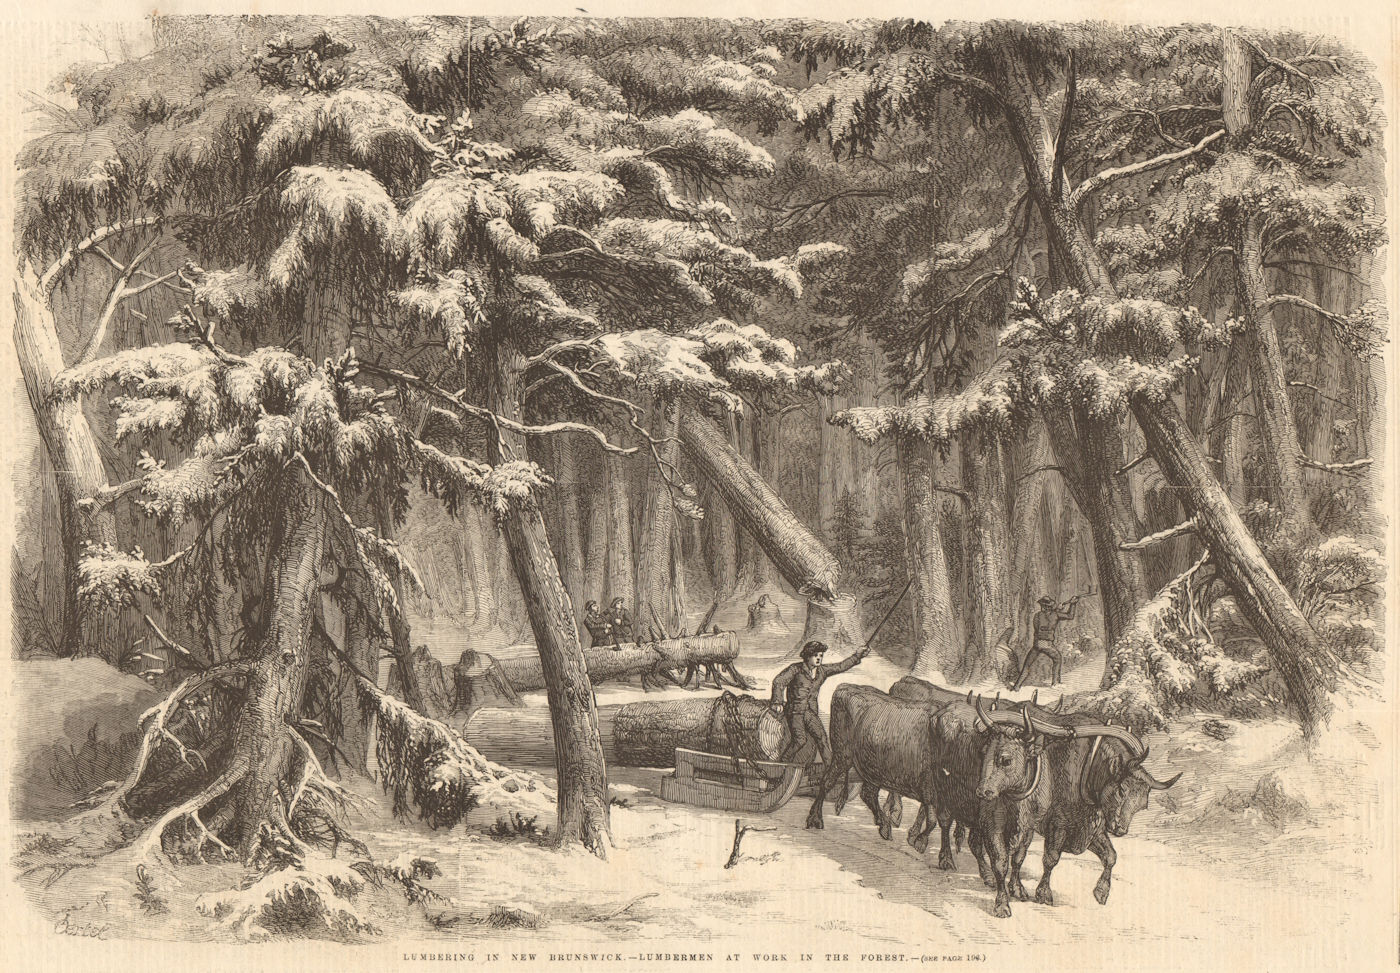 Associate Product Lumbering in New Brunswick - lumbermen at work in the forest. Canada 1858